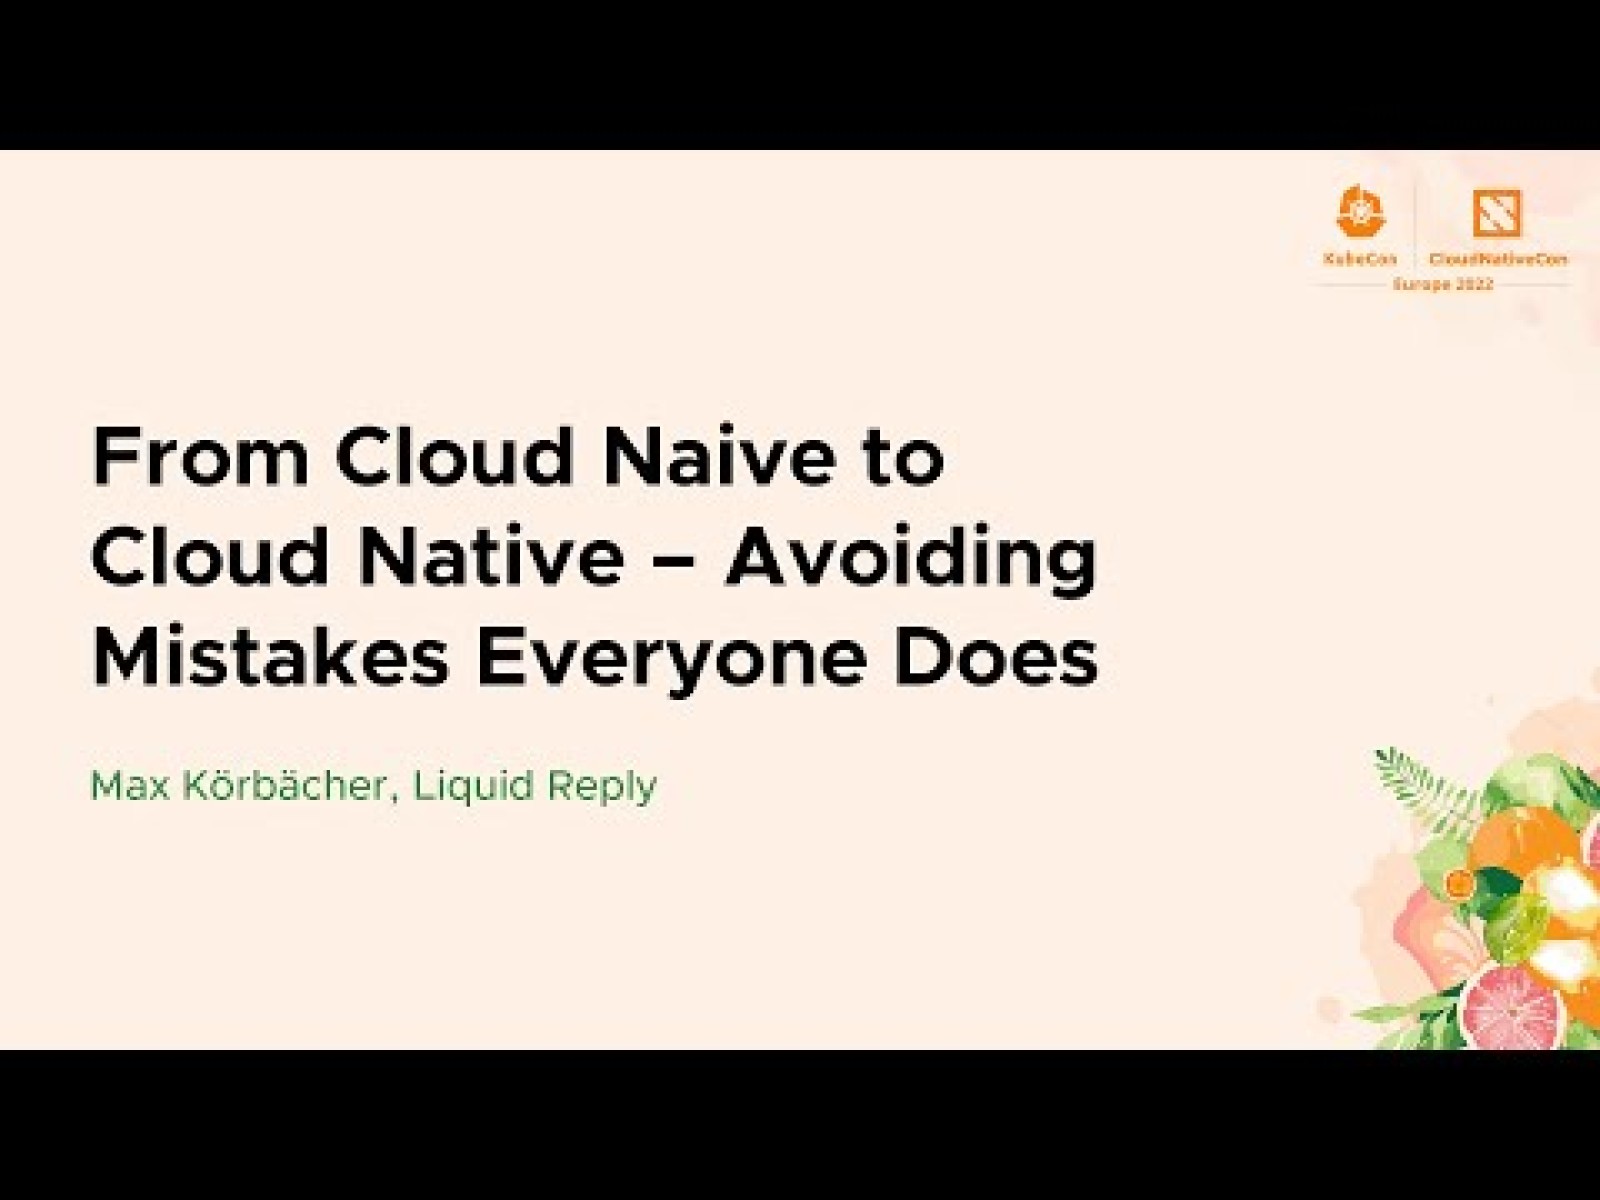 From Cloud Naive to Cloud Native - Avoiding mistakes everyone does